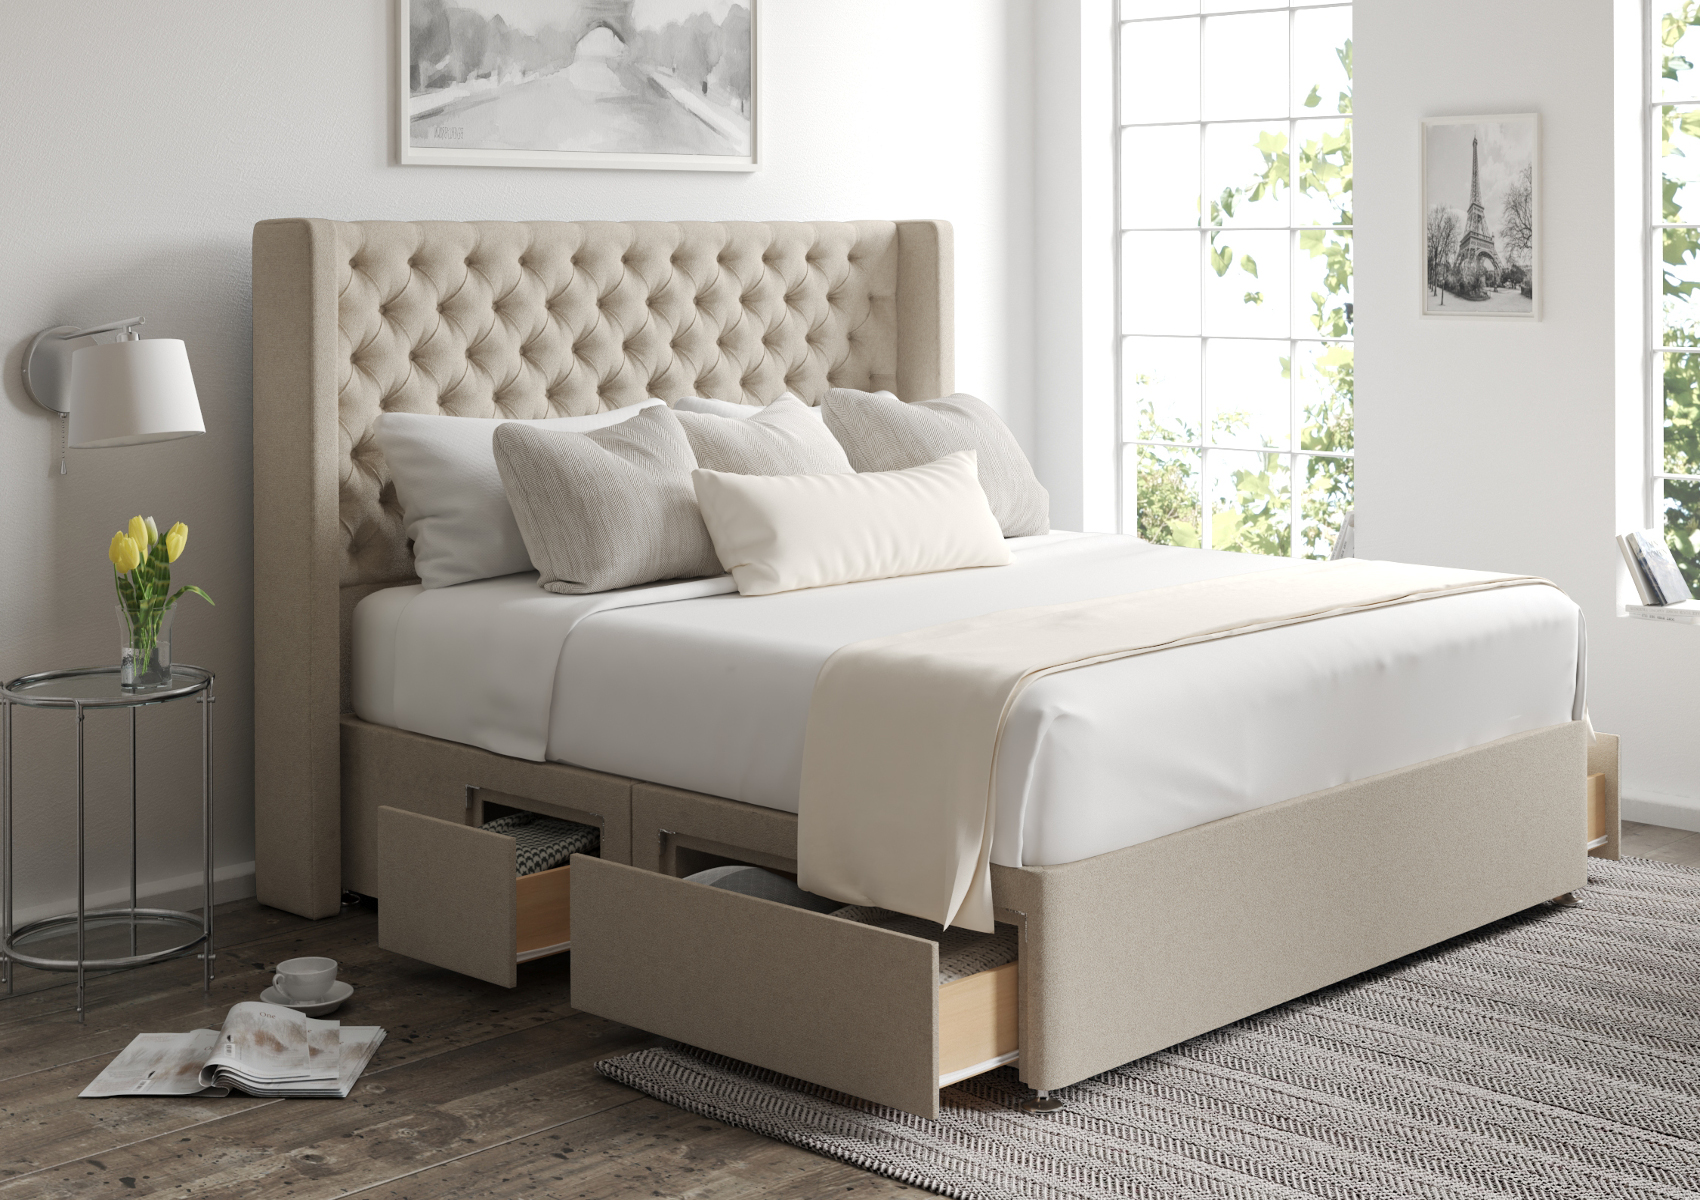 View Bella Arran Natural Upholstered Double Bed Time4Sleep information